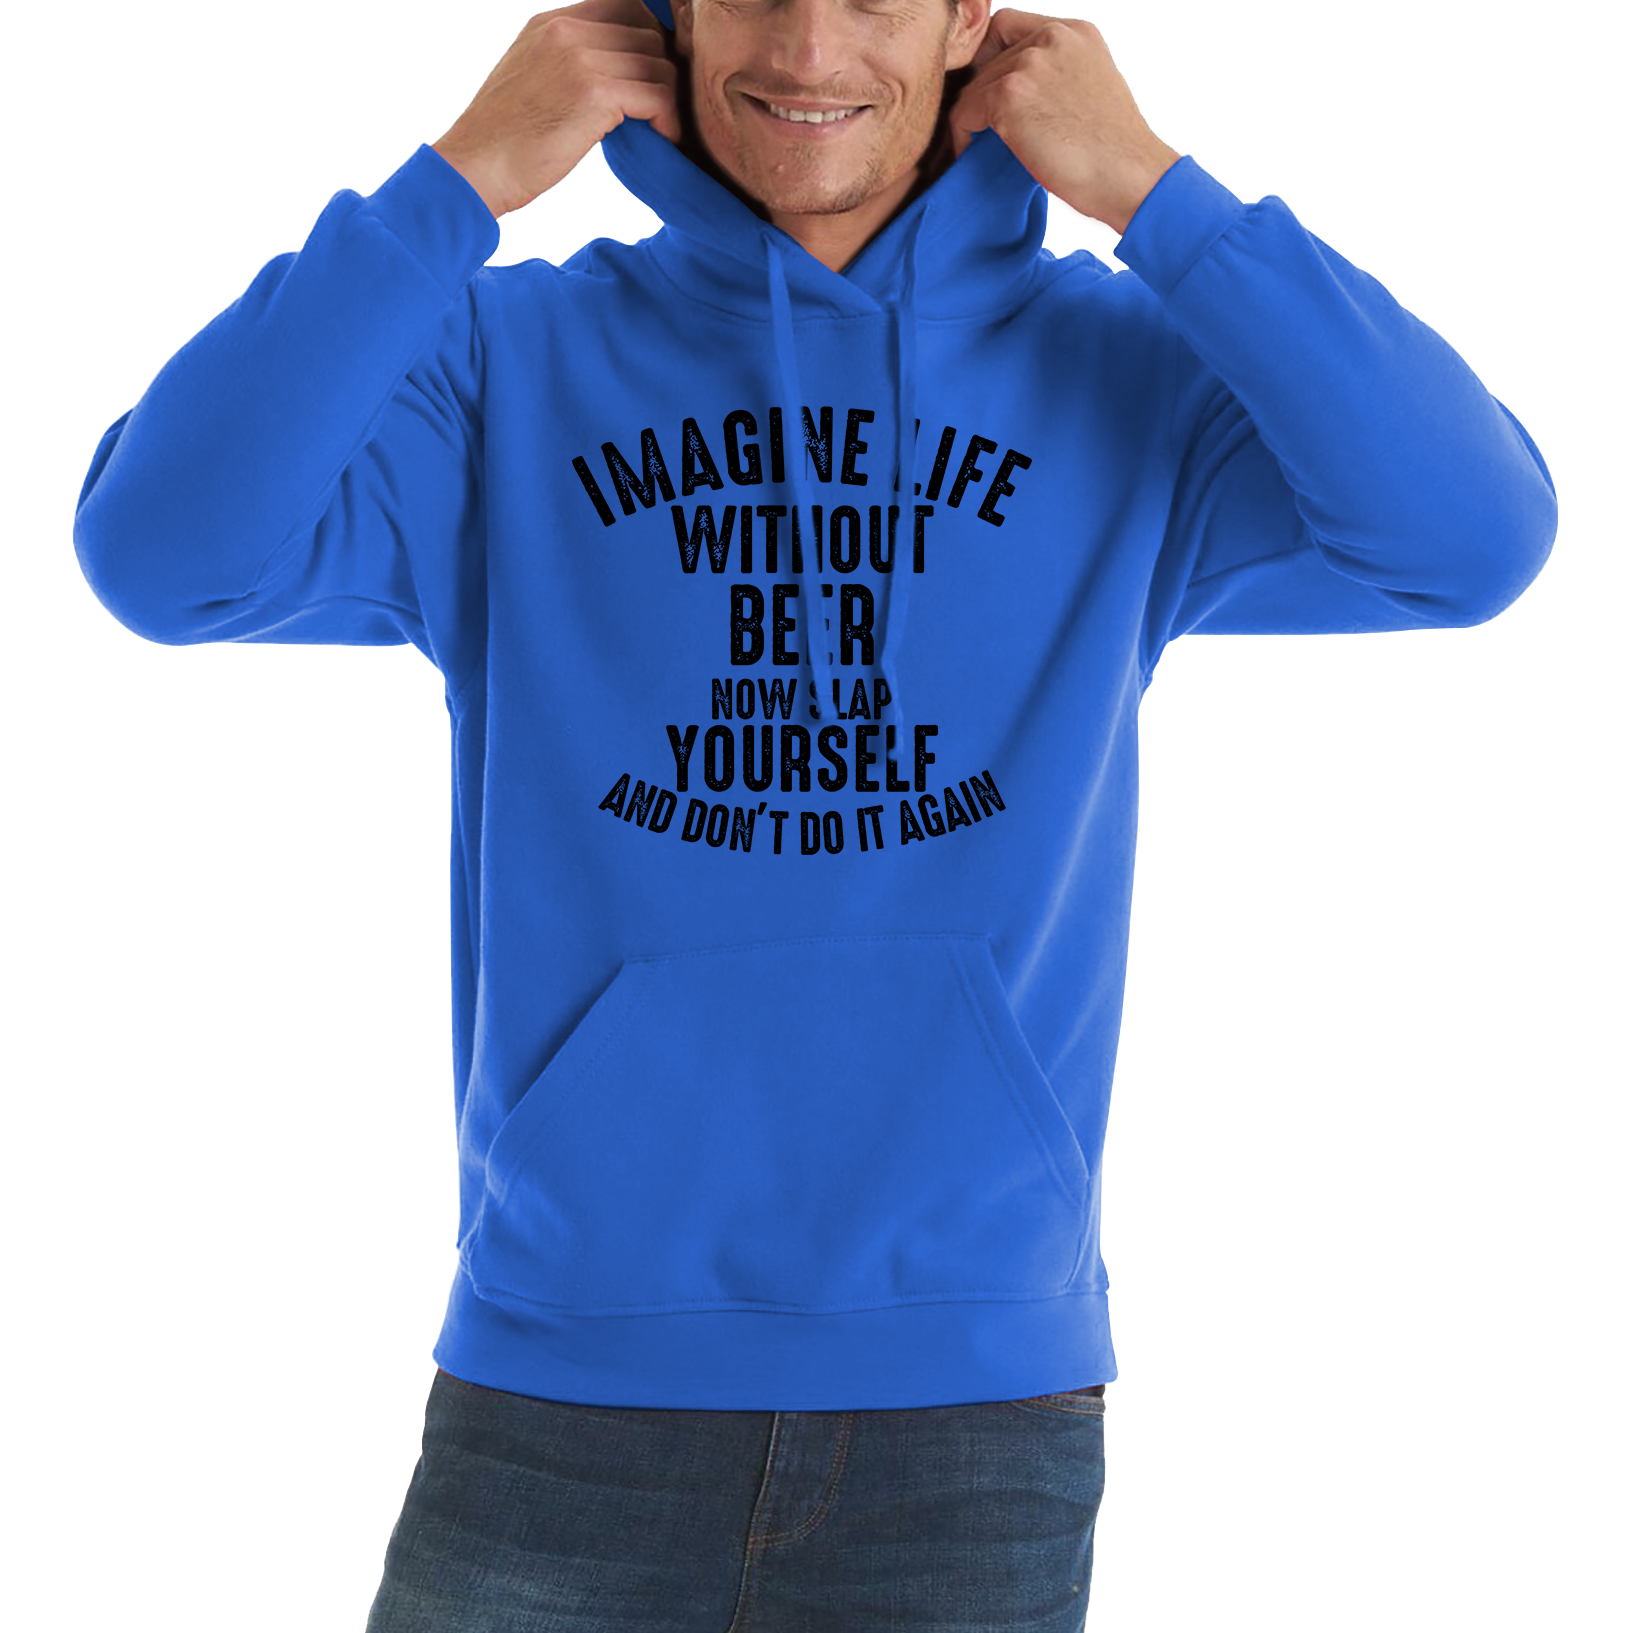 Imagine Life Without Beer Now Slap Yourself And Don' Do It Again Hoodie Drink Lovers Beer Drinking Unisex Hoodie